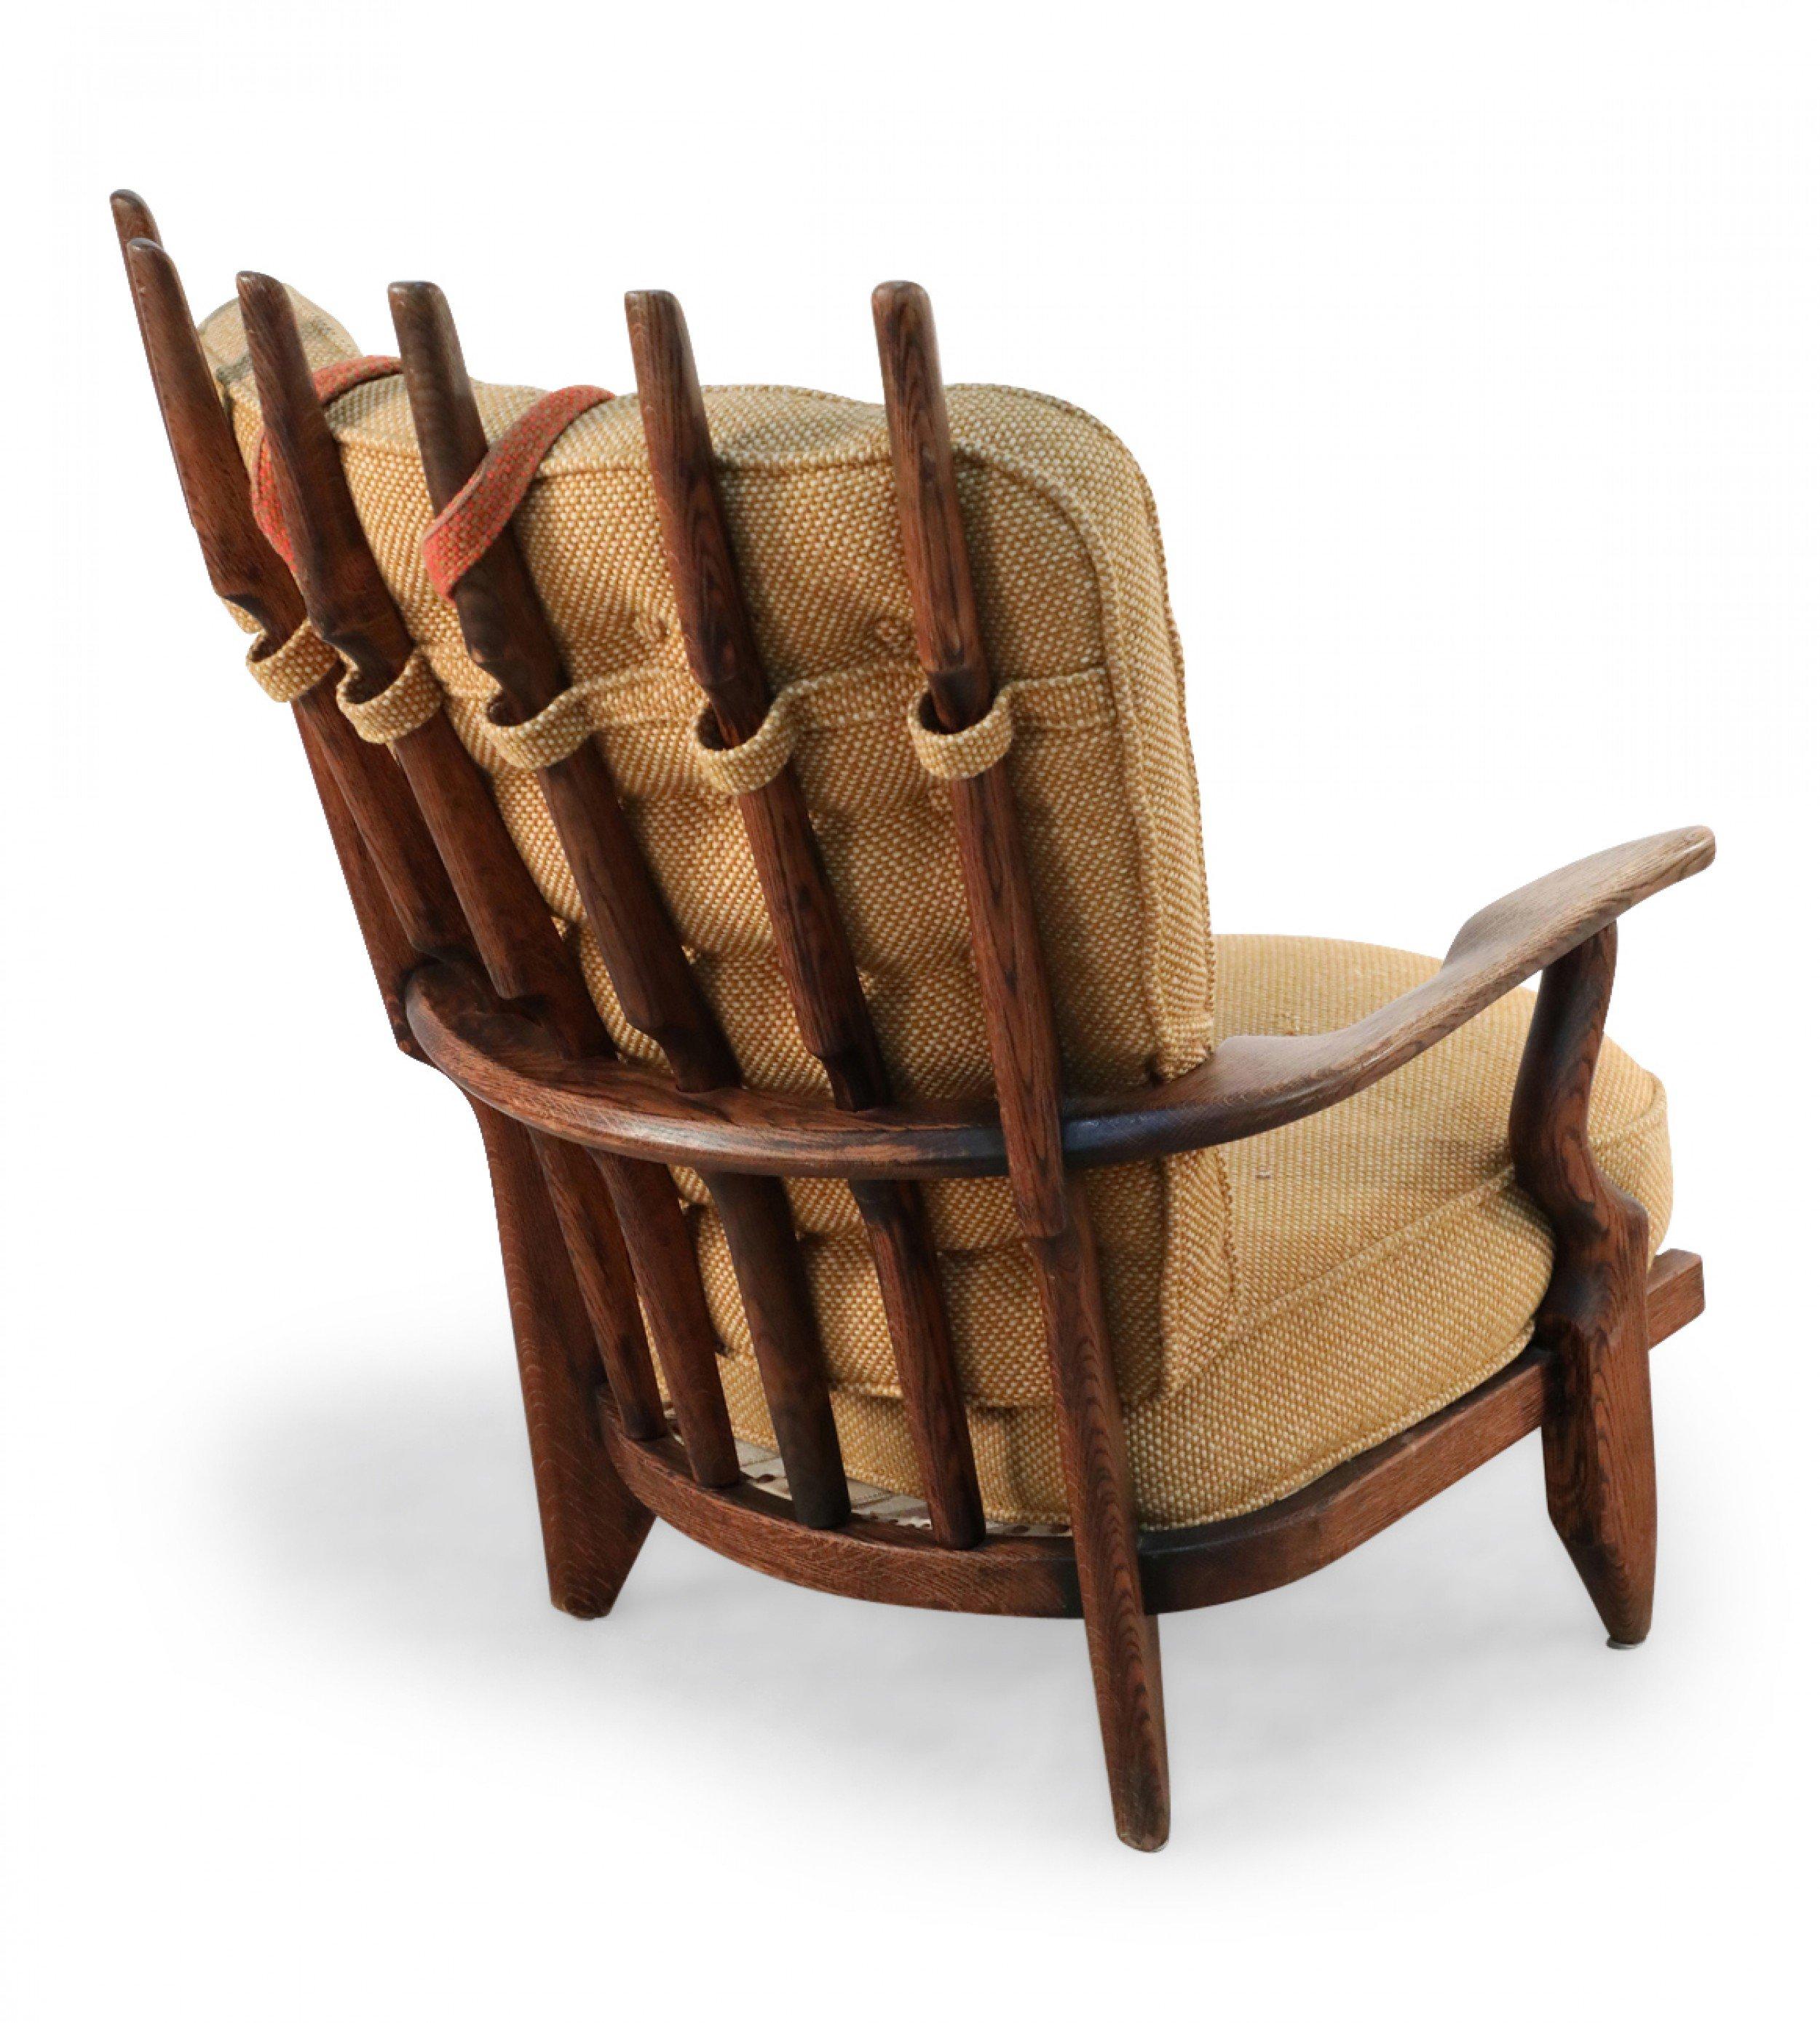 Mid-century French Grand-Repos oak armchair with six fanning back slats and beige button tufted upholstery with an orange head cushion (GUILLERME ET CHAMBRON).
      